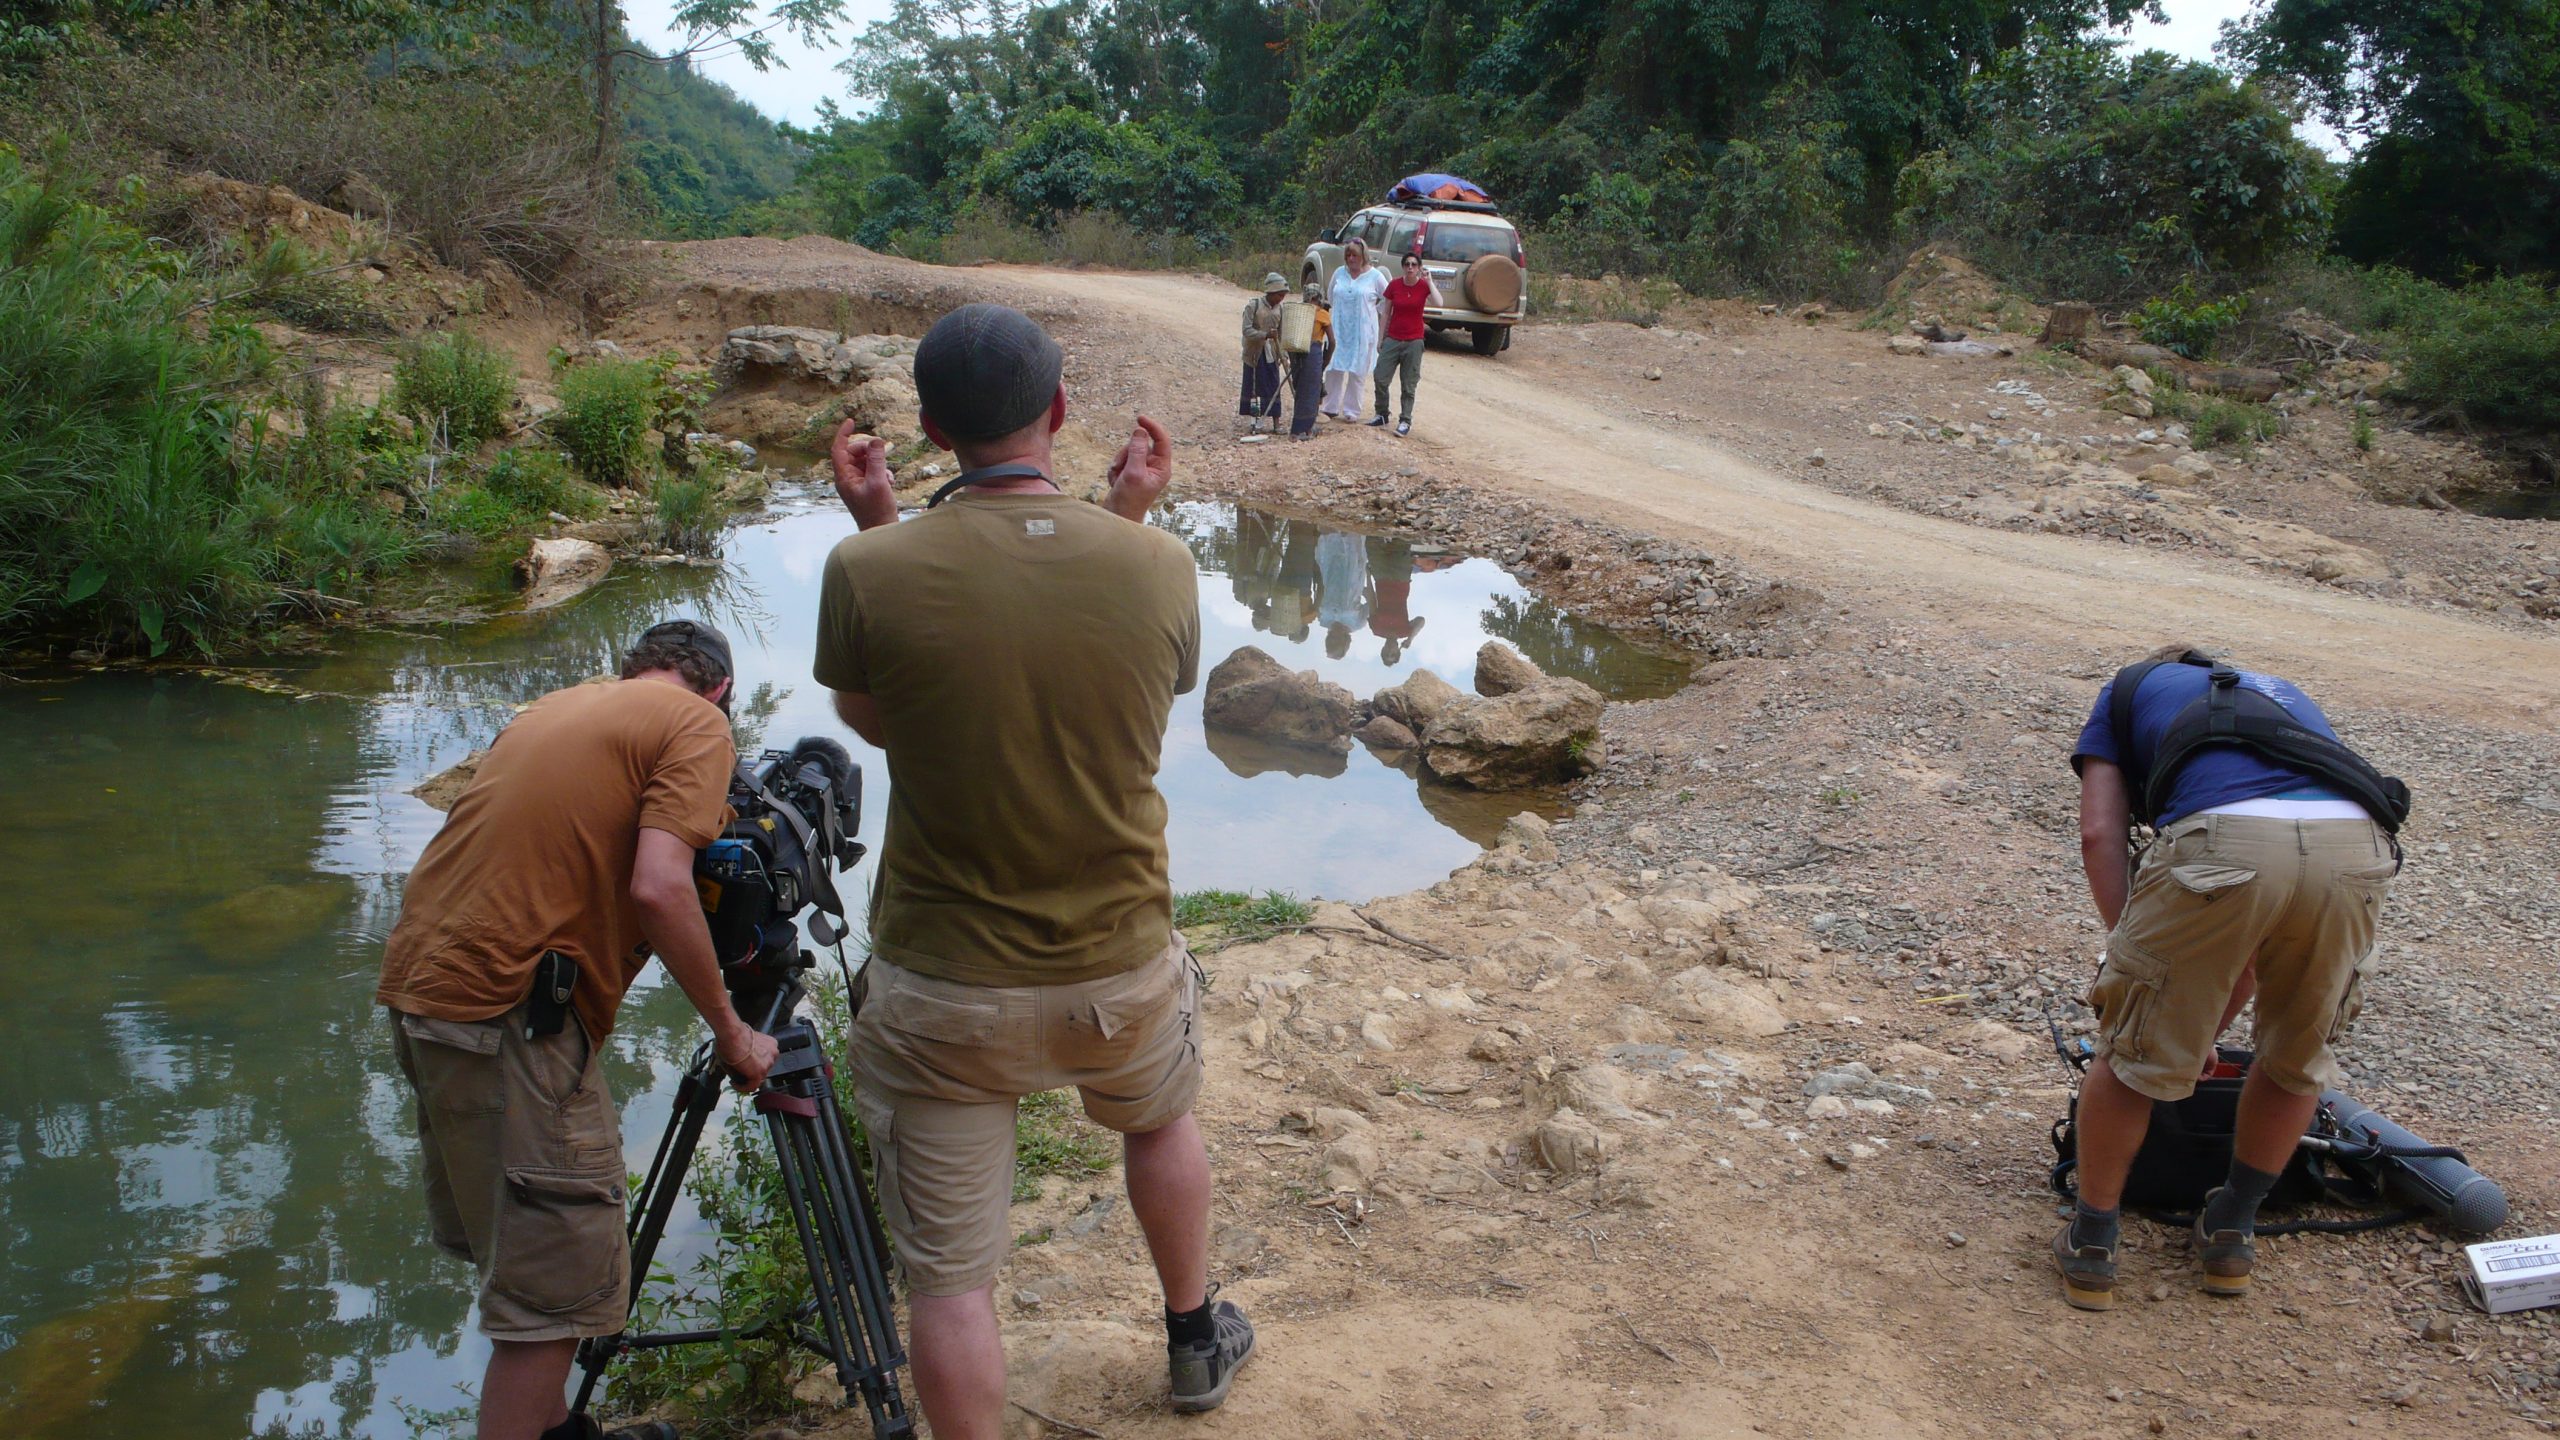 filming for the BBC on the Ho Chi Minh Trail